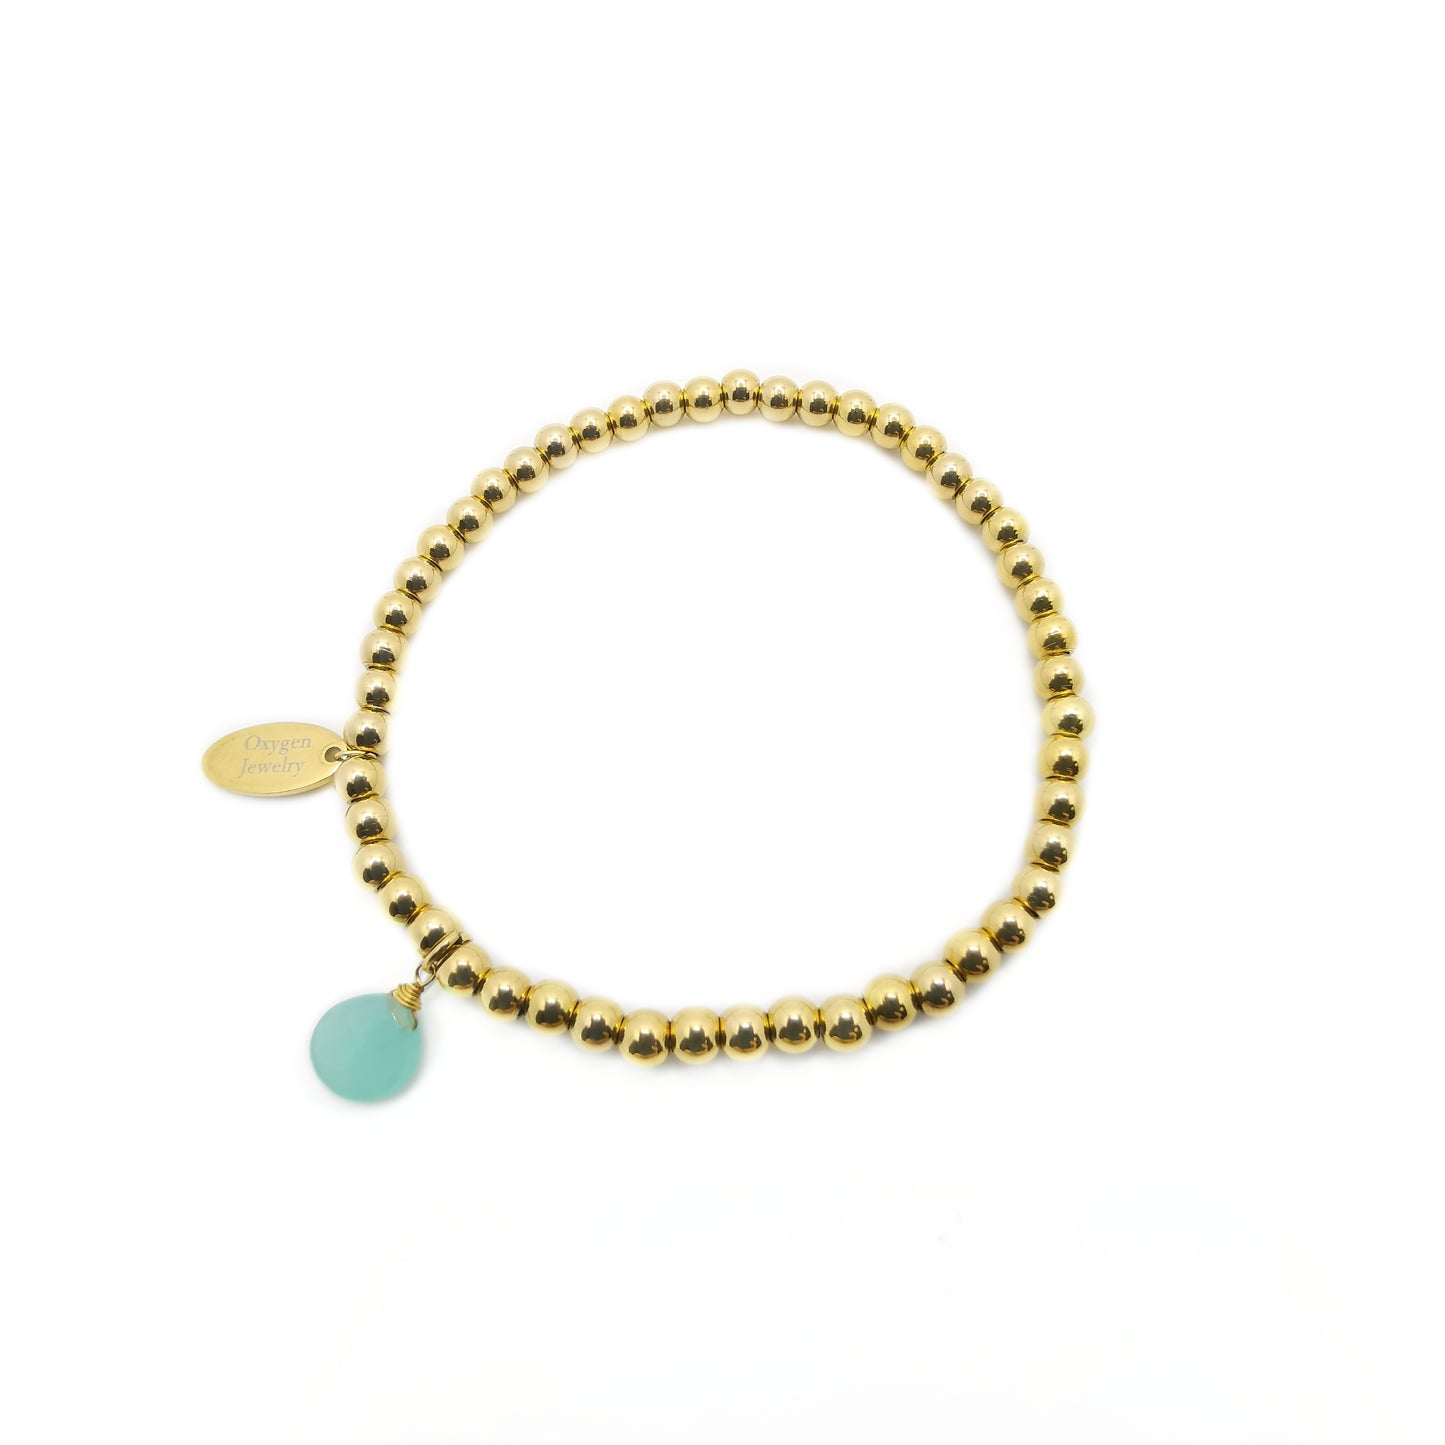 Aquamarine Chalcedony Pear Faceted Metal Bead Stretch Bracelet